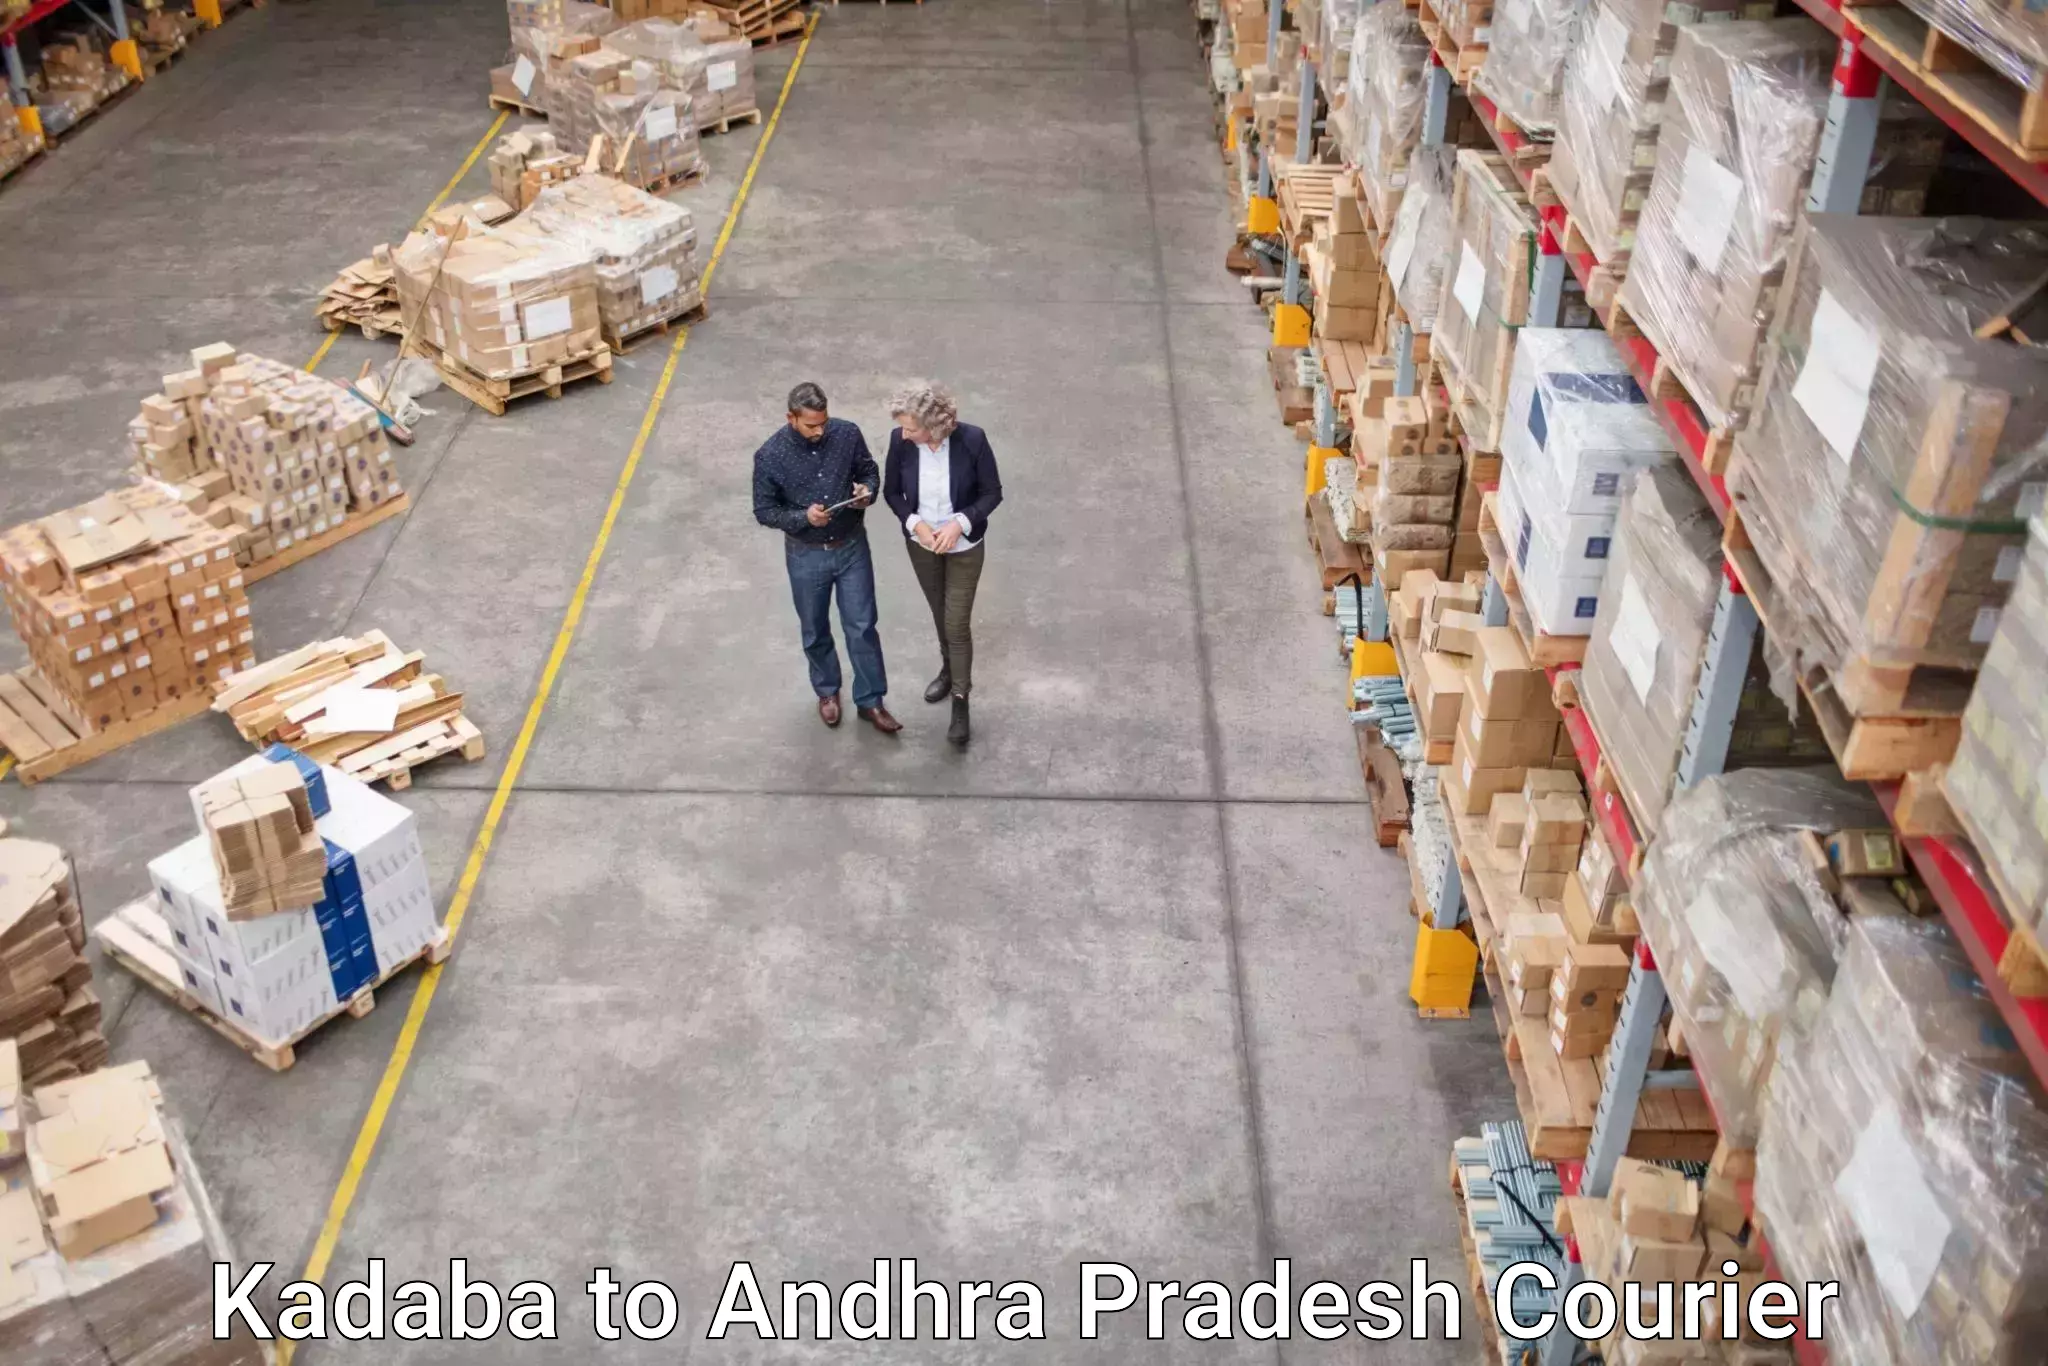 State-of-the-art courier technology Kadaba to Andhra Pradesh